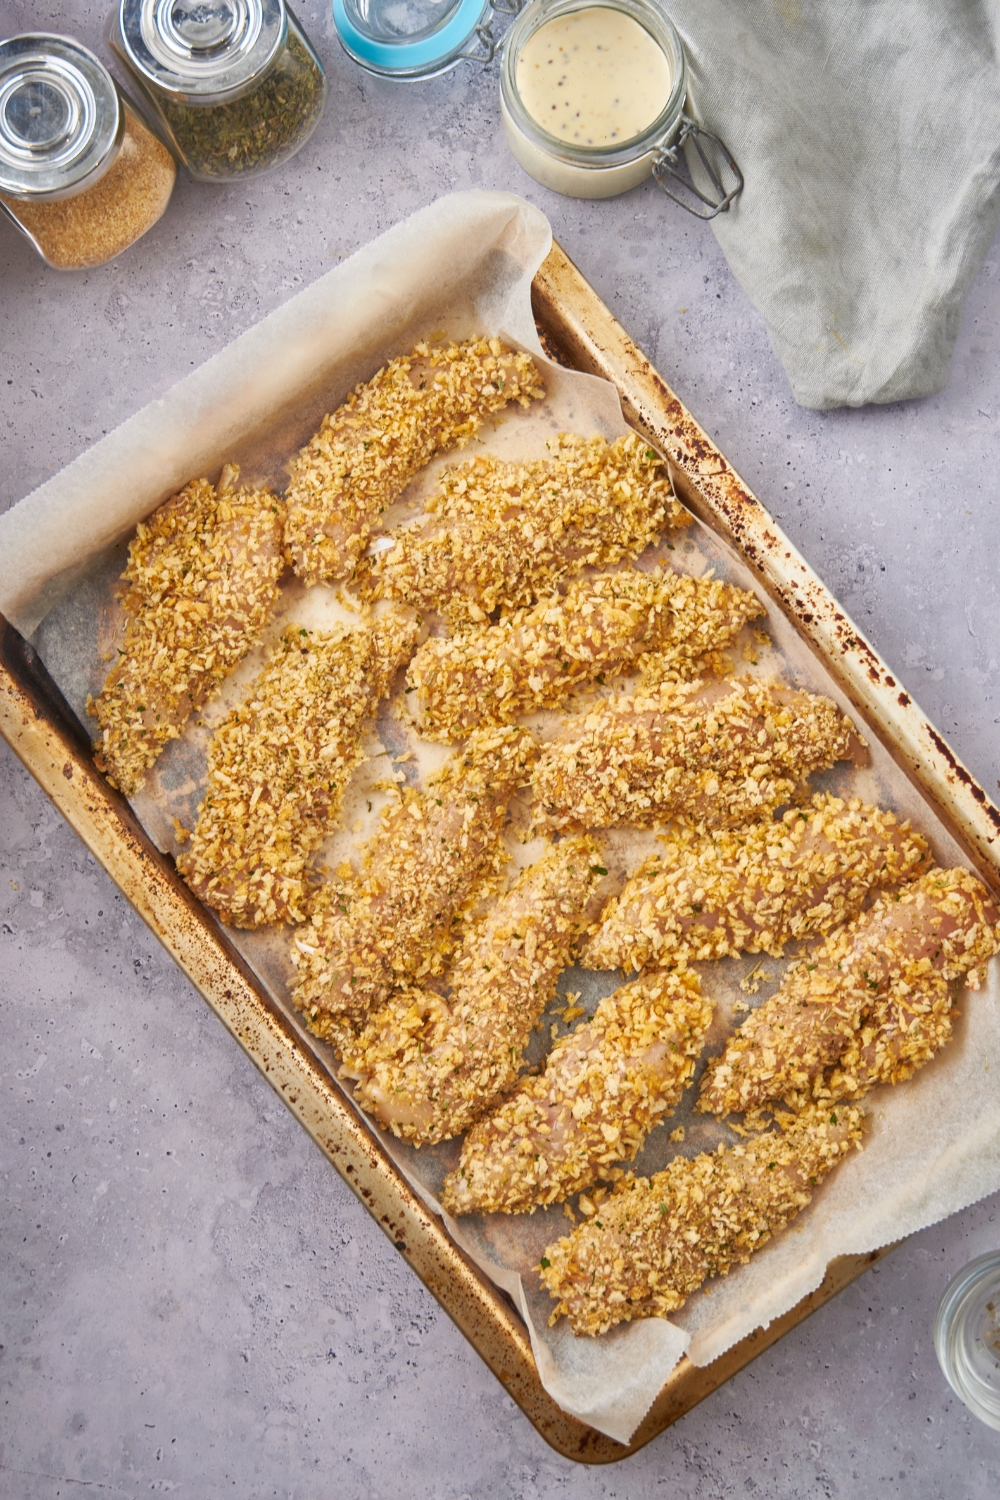 Twelve unbaked chicken tenders coated in panko bread crumbs and lined up on a baking sheet with parchment paper.